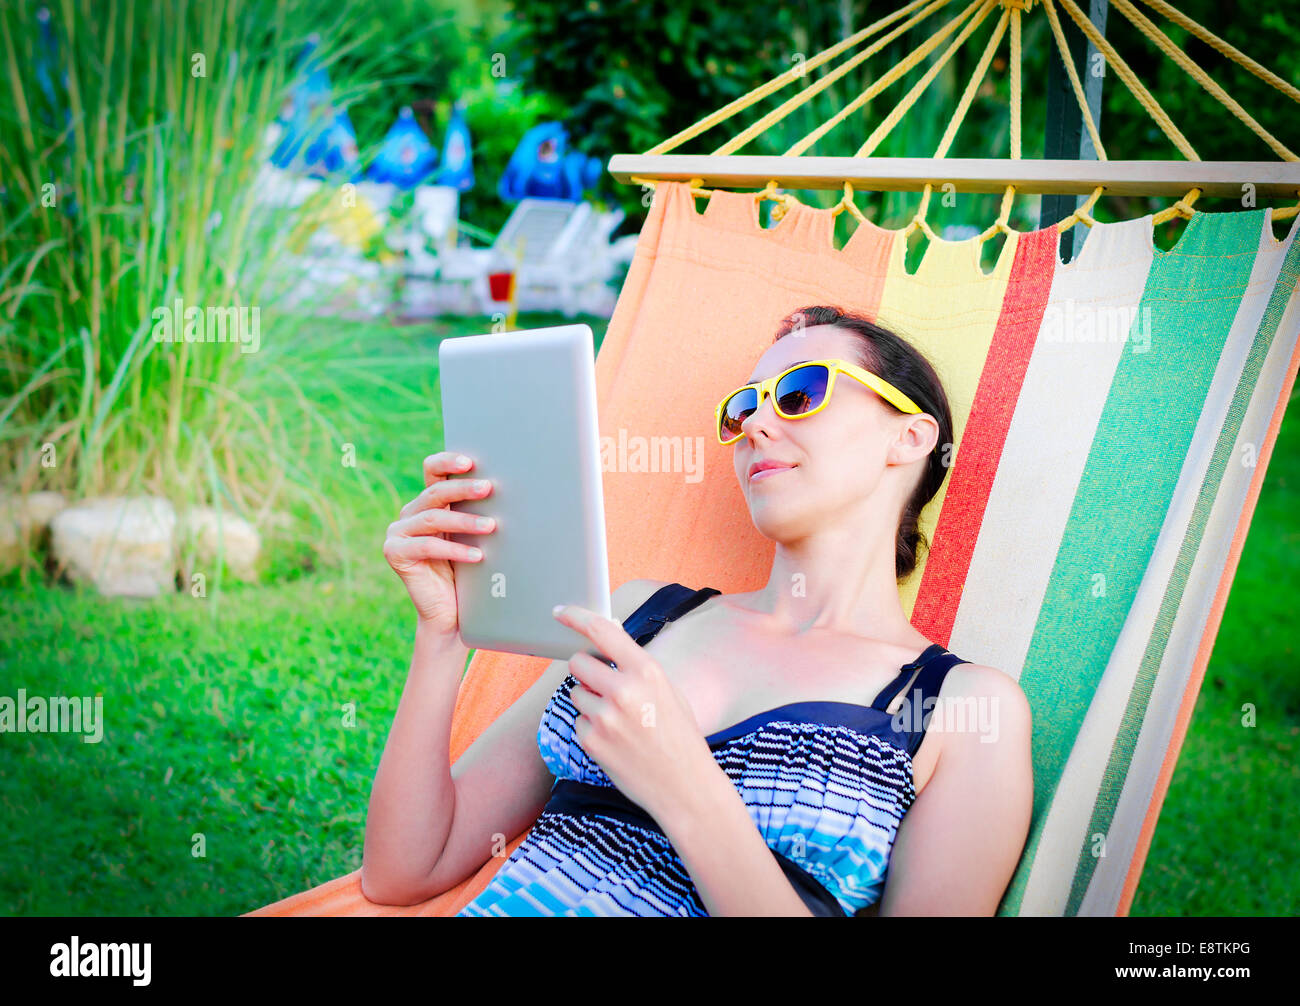 Woman Relaxing In Hammock With Tablet PC Stock Photo